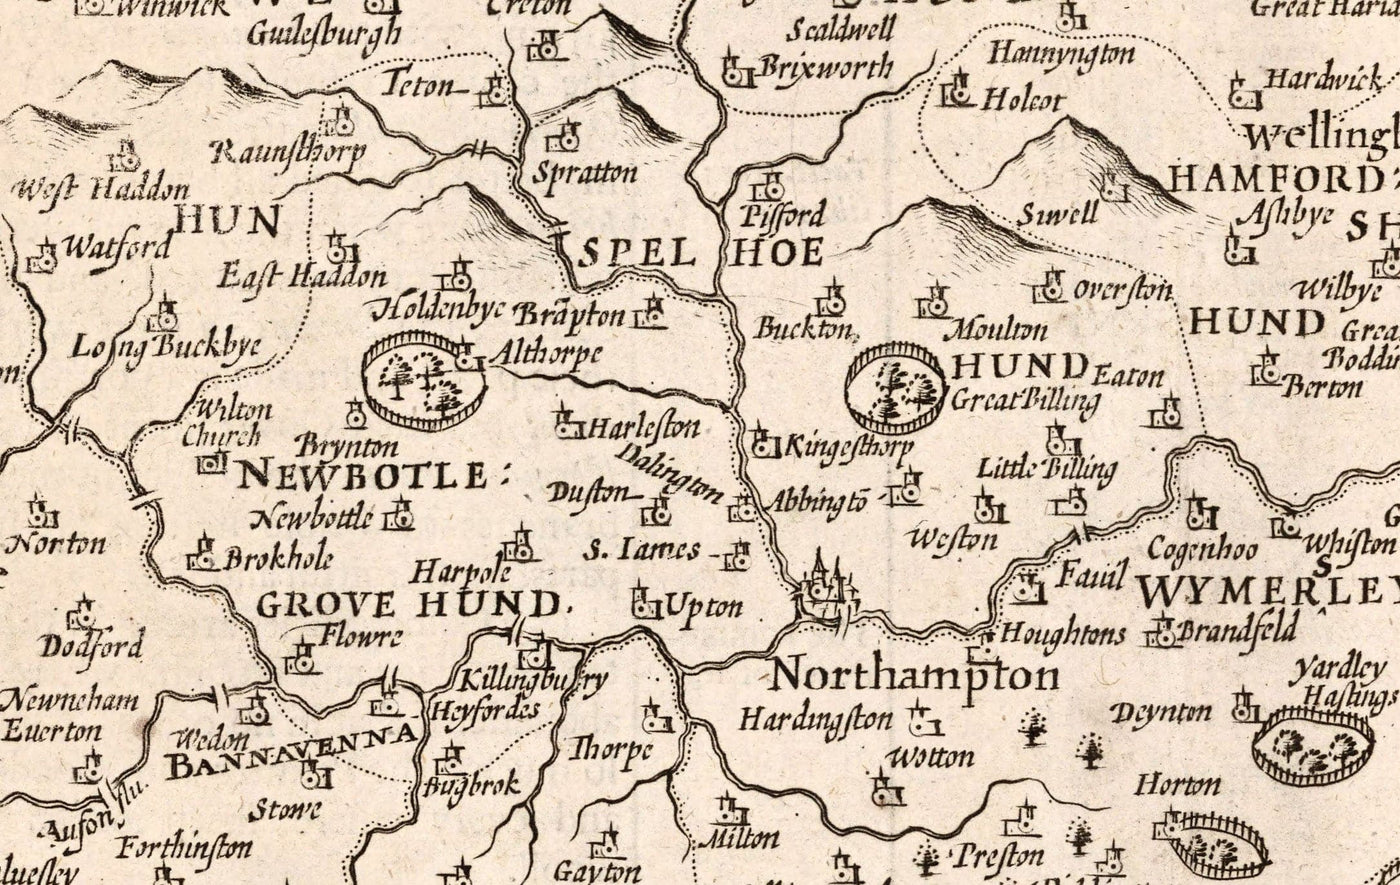 Old Monochrome Map of Northamptonshire, 1611 by John Speed - Northampton, Kettering, Peterborough, Corby, Stamford, Brackley